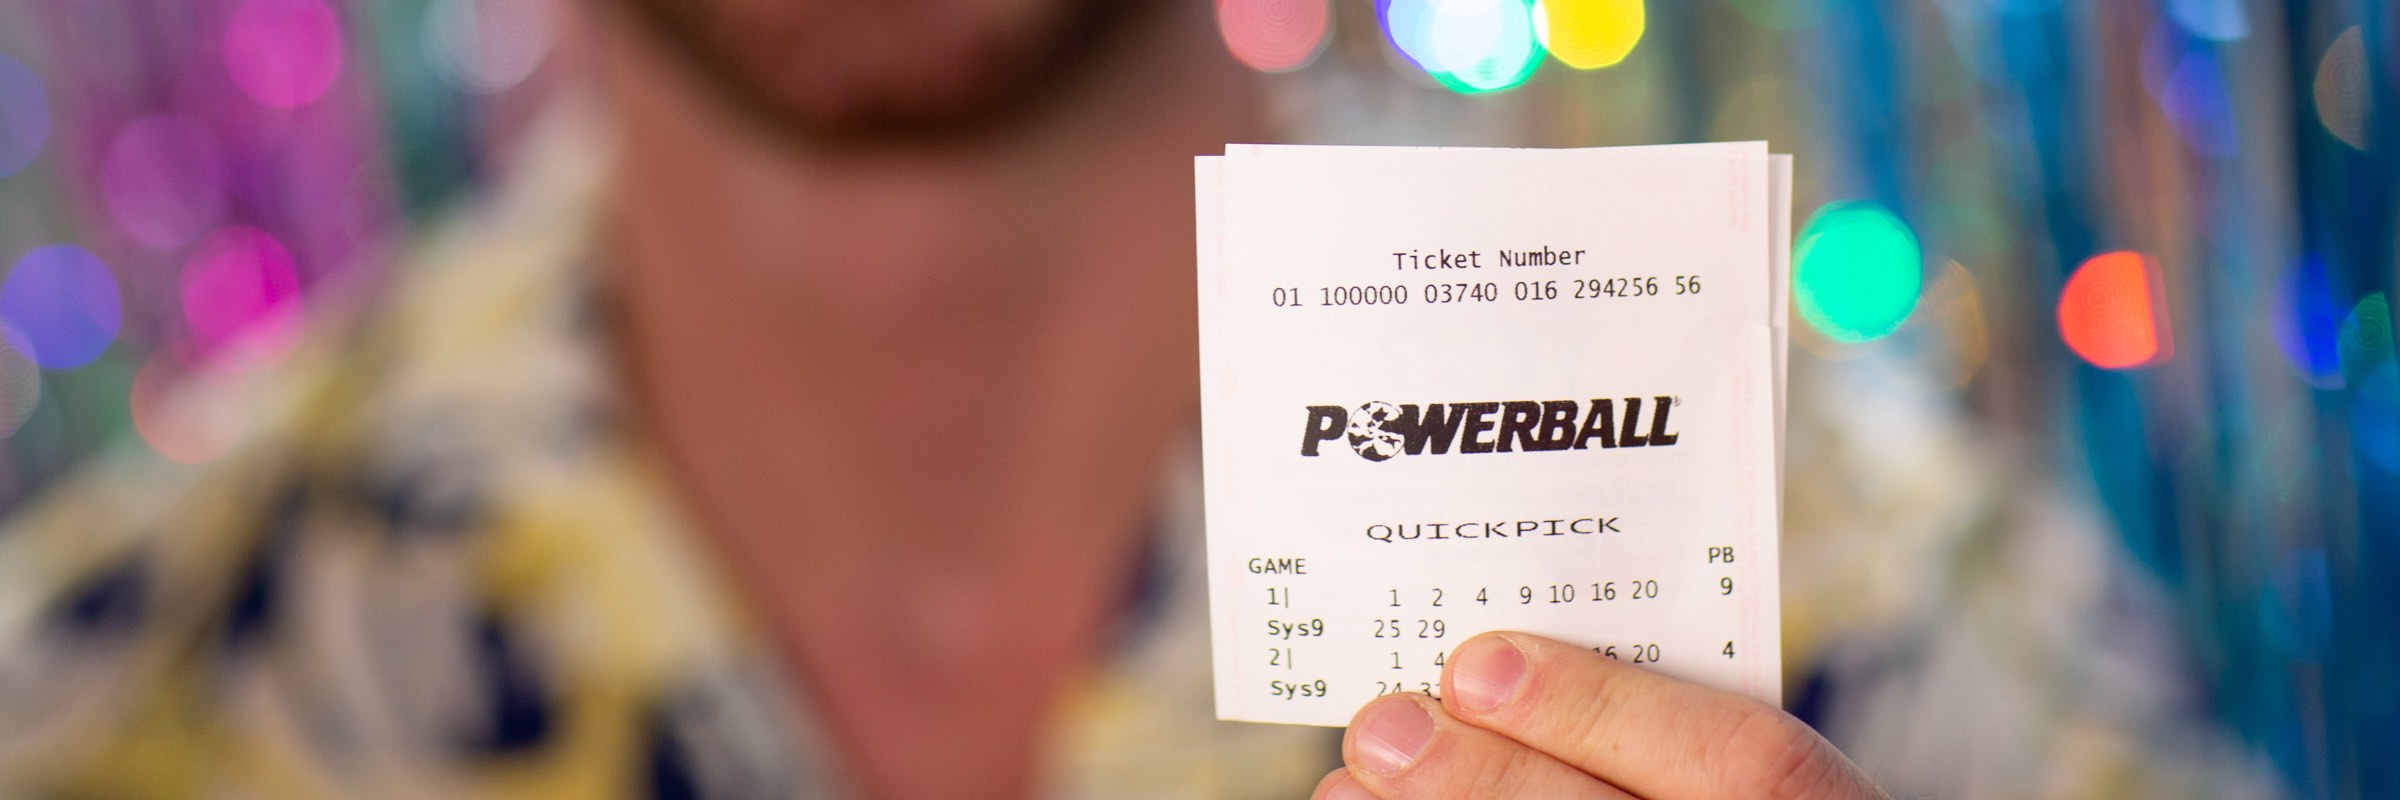 Search is on for mystery Powerball winner who scored $4 million